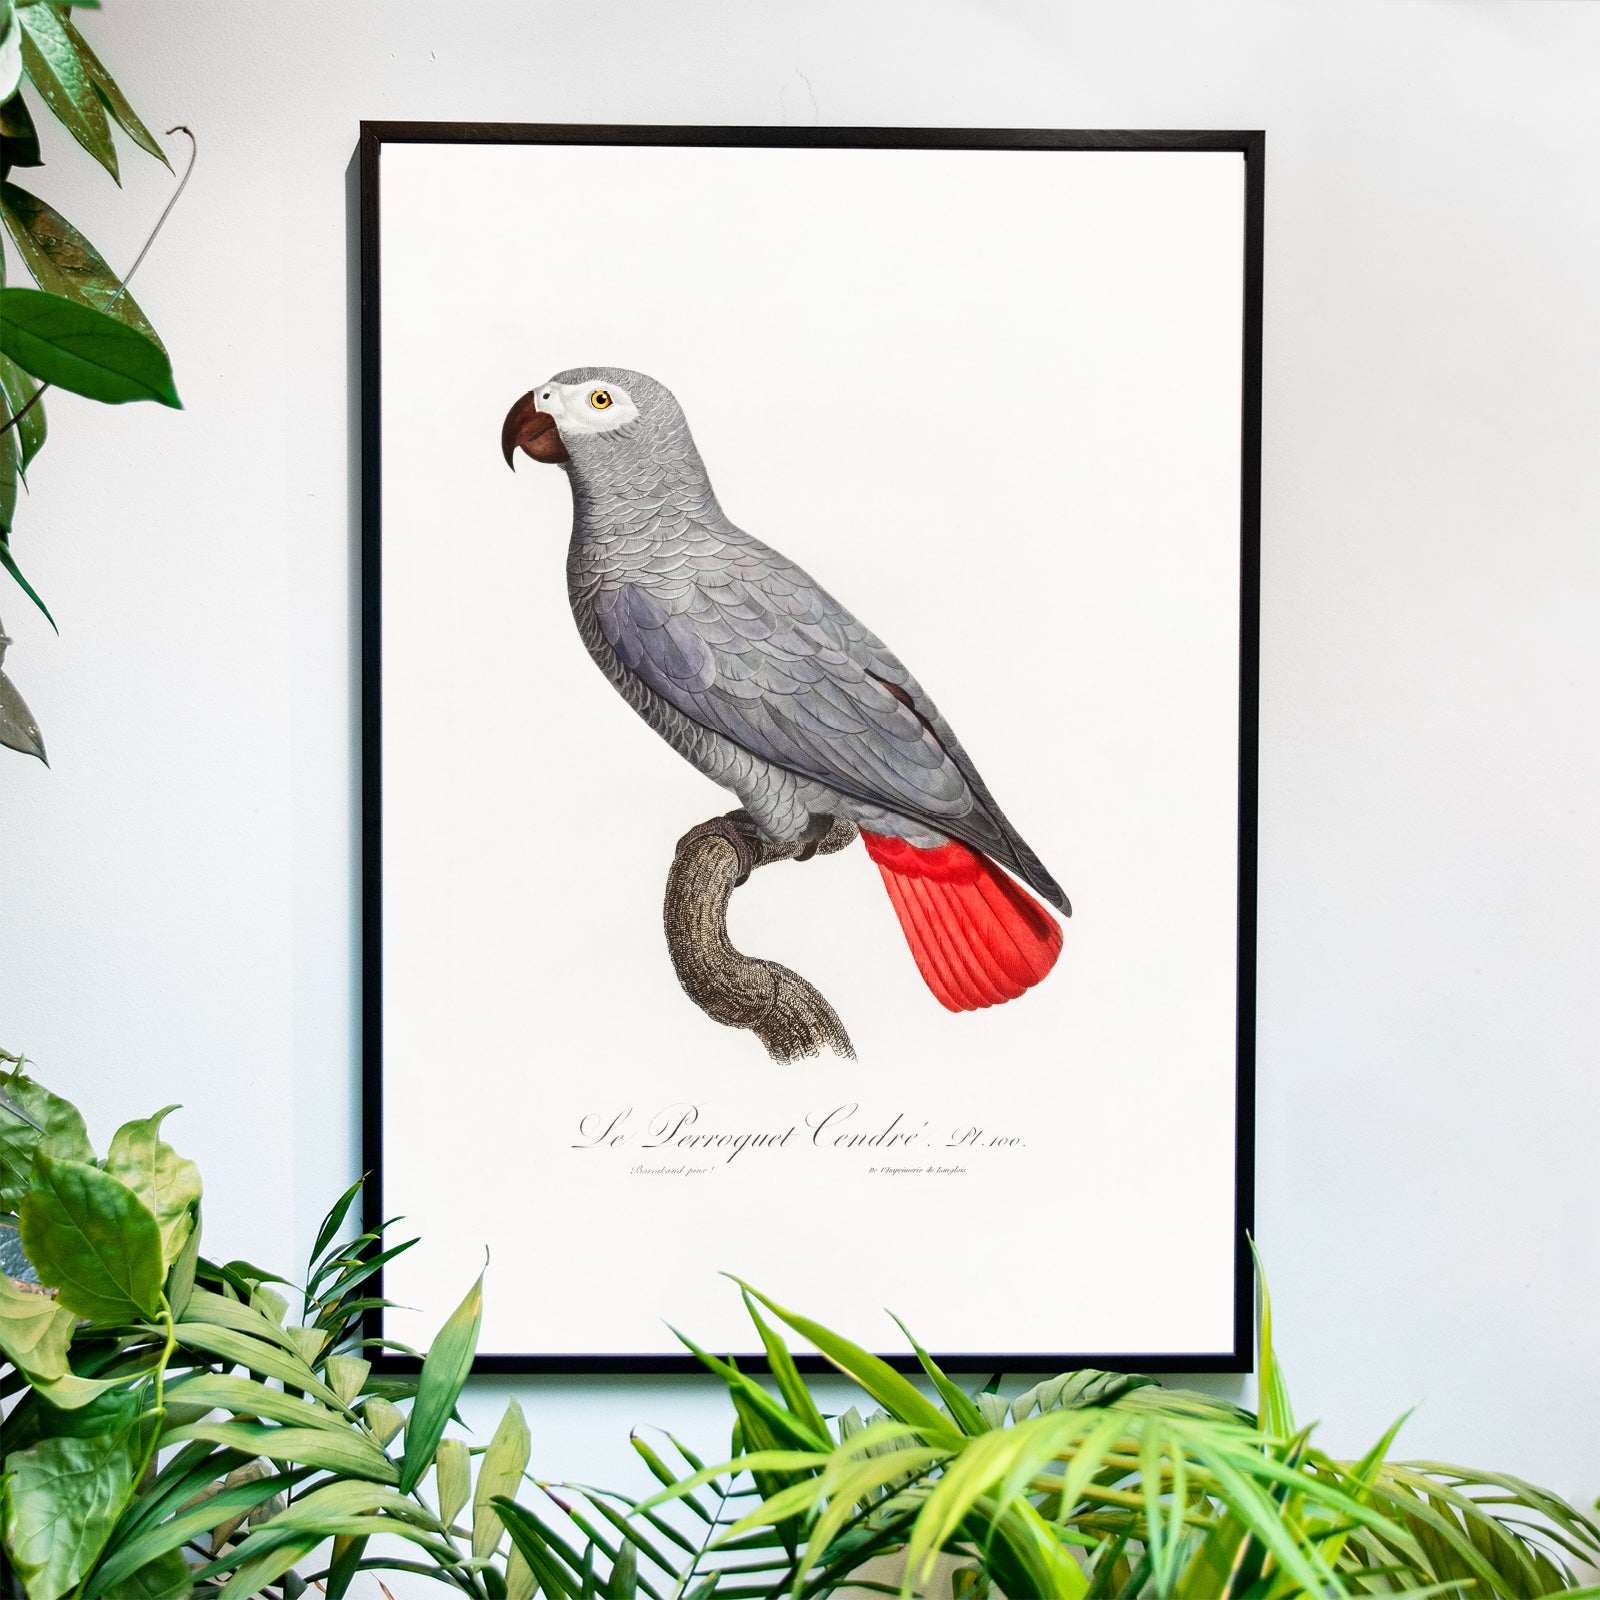 The Grey Parrot - Historly AB